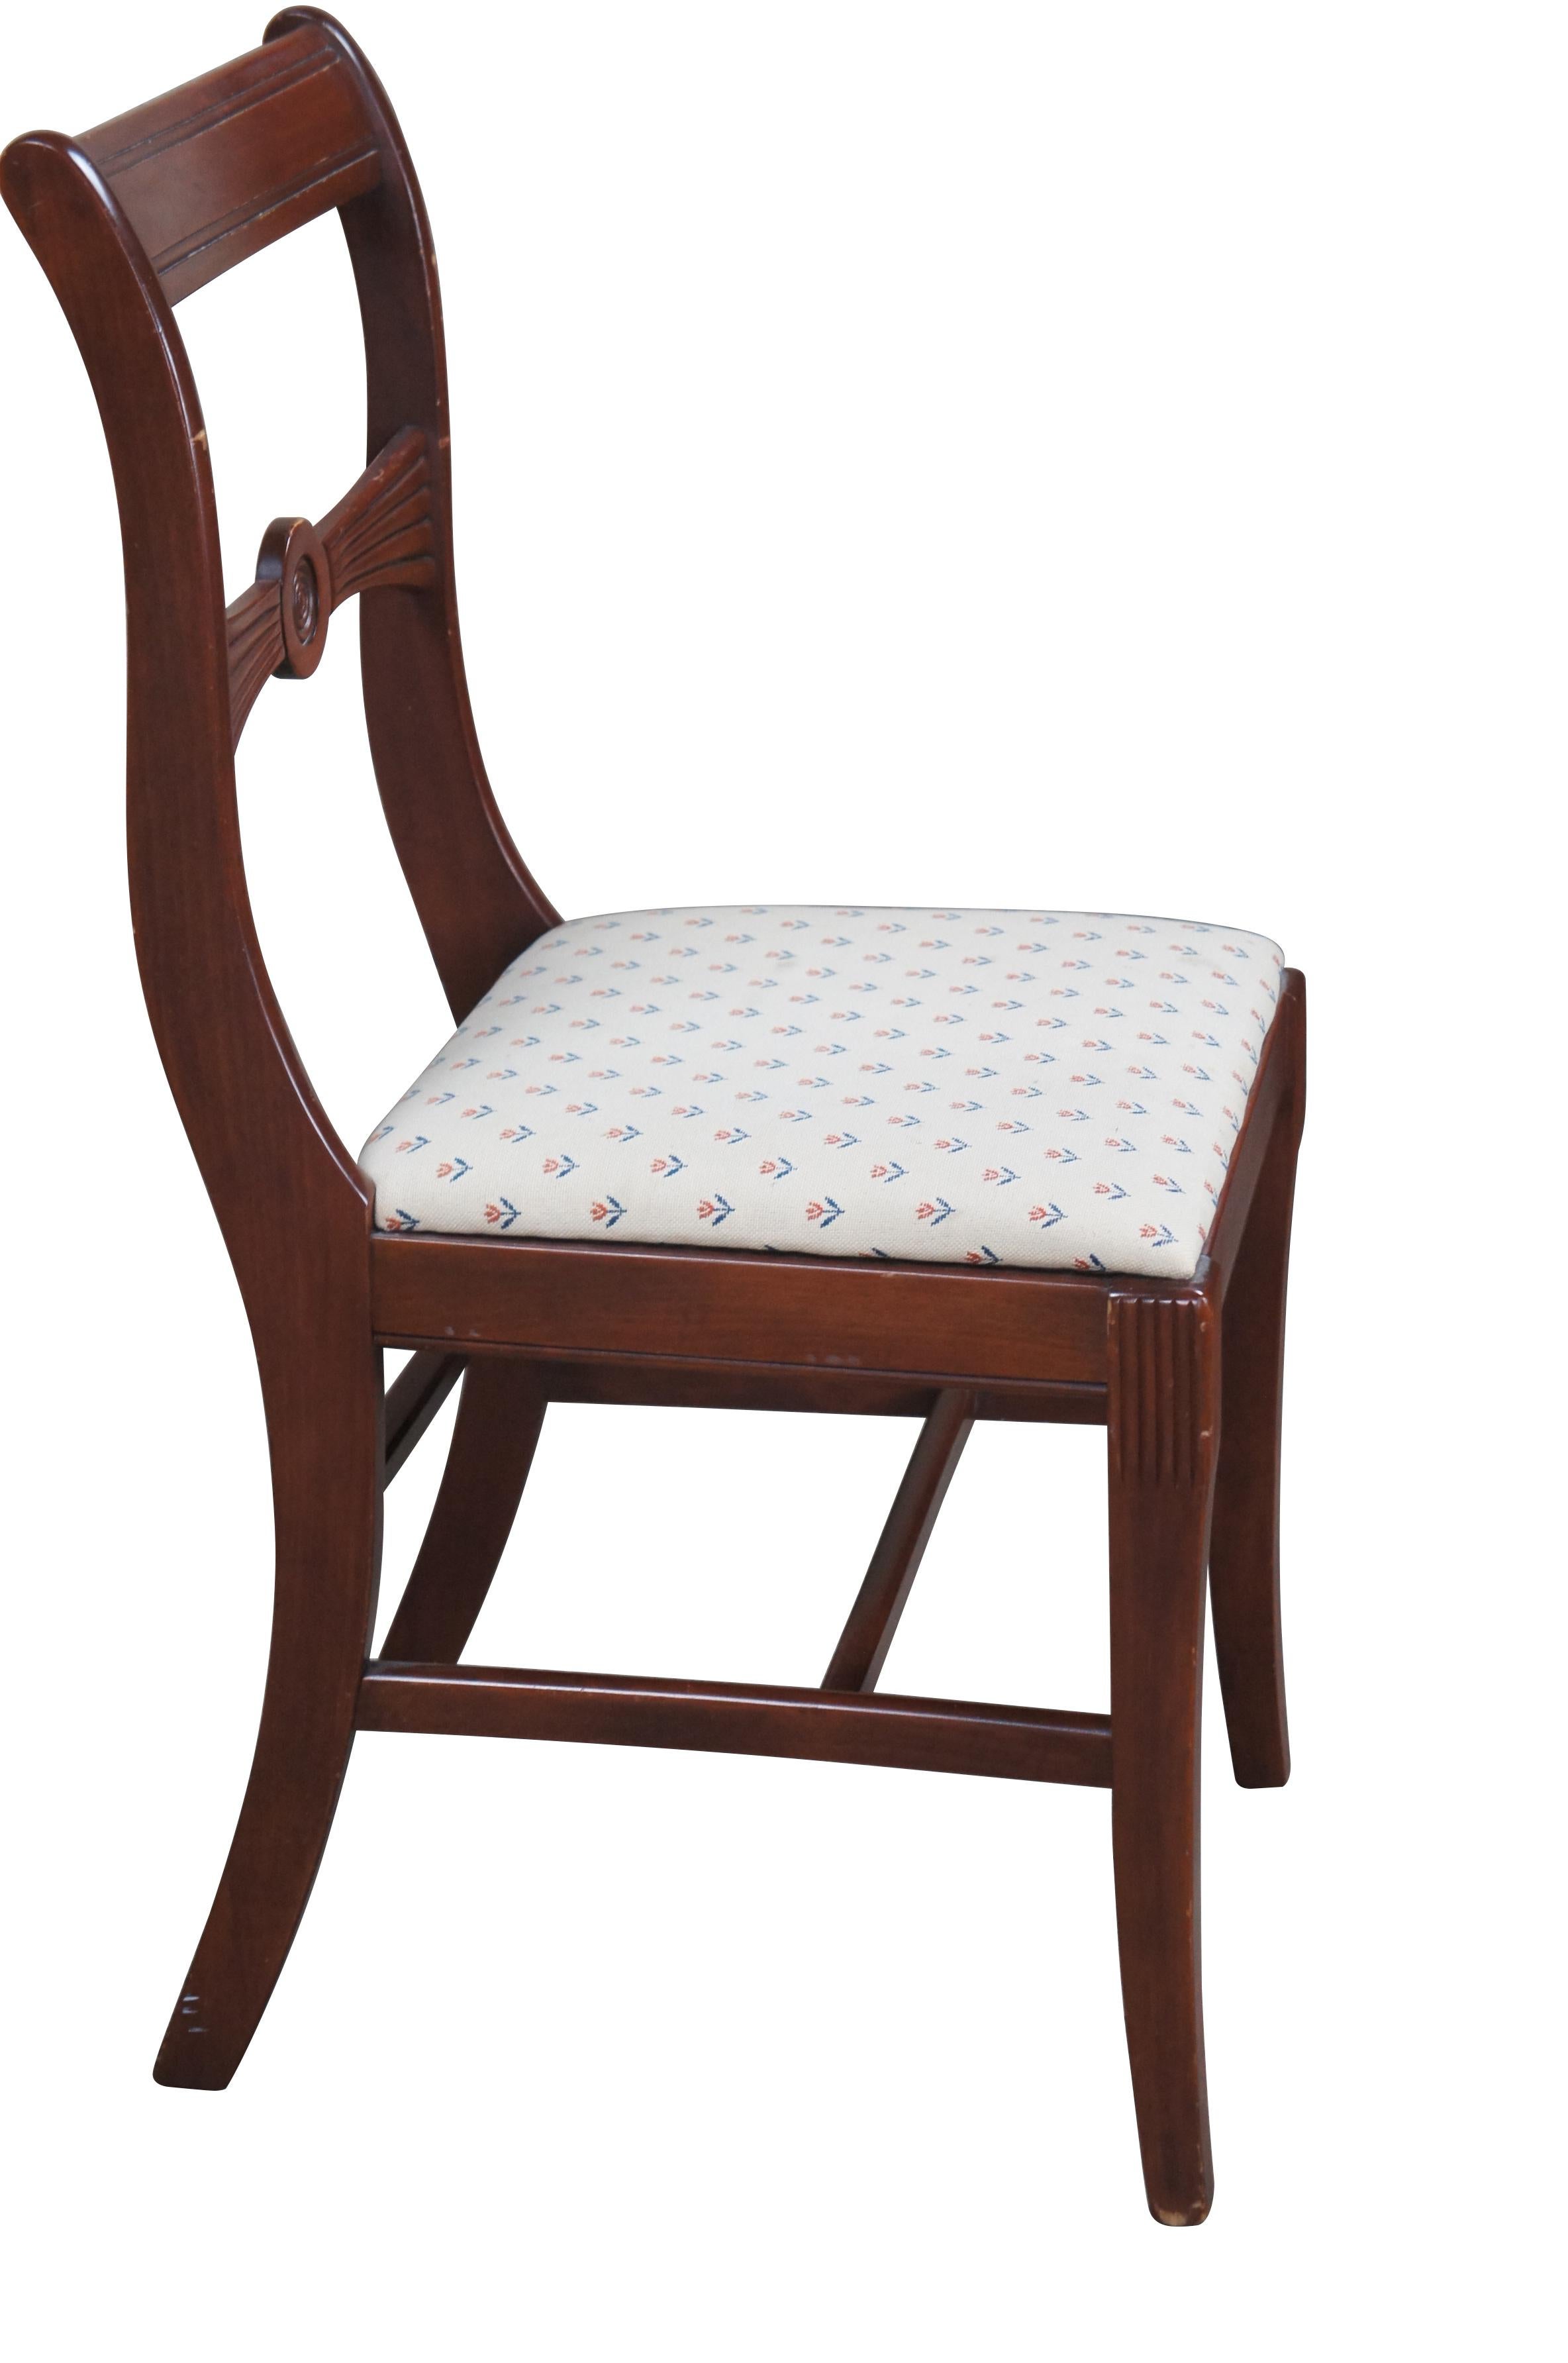 1940s Duncan Phyfe / Regency Style dining side chair.  Made from mahogany with a contoured crest rail and bow shaped back.  Features an upholstered seat with repeating tulip / rose pattern.  Front legs are fluted along the front corner and tapered,